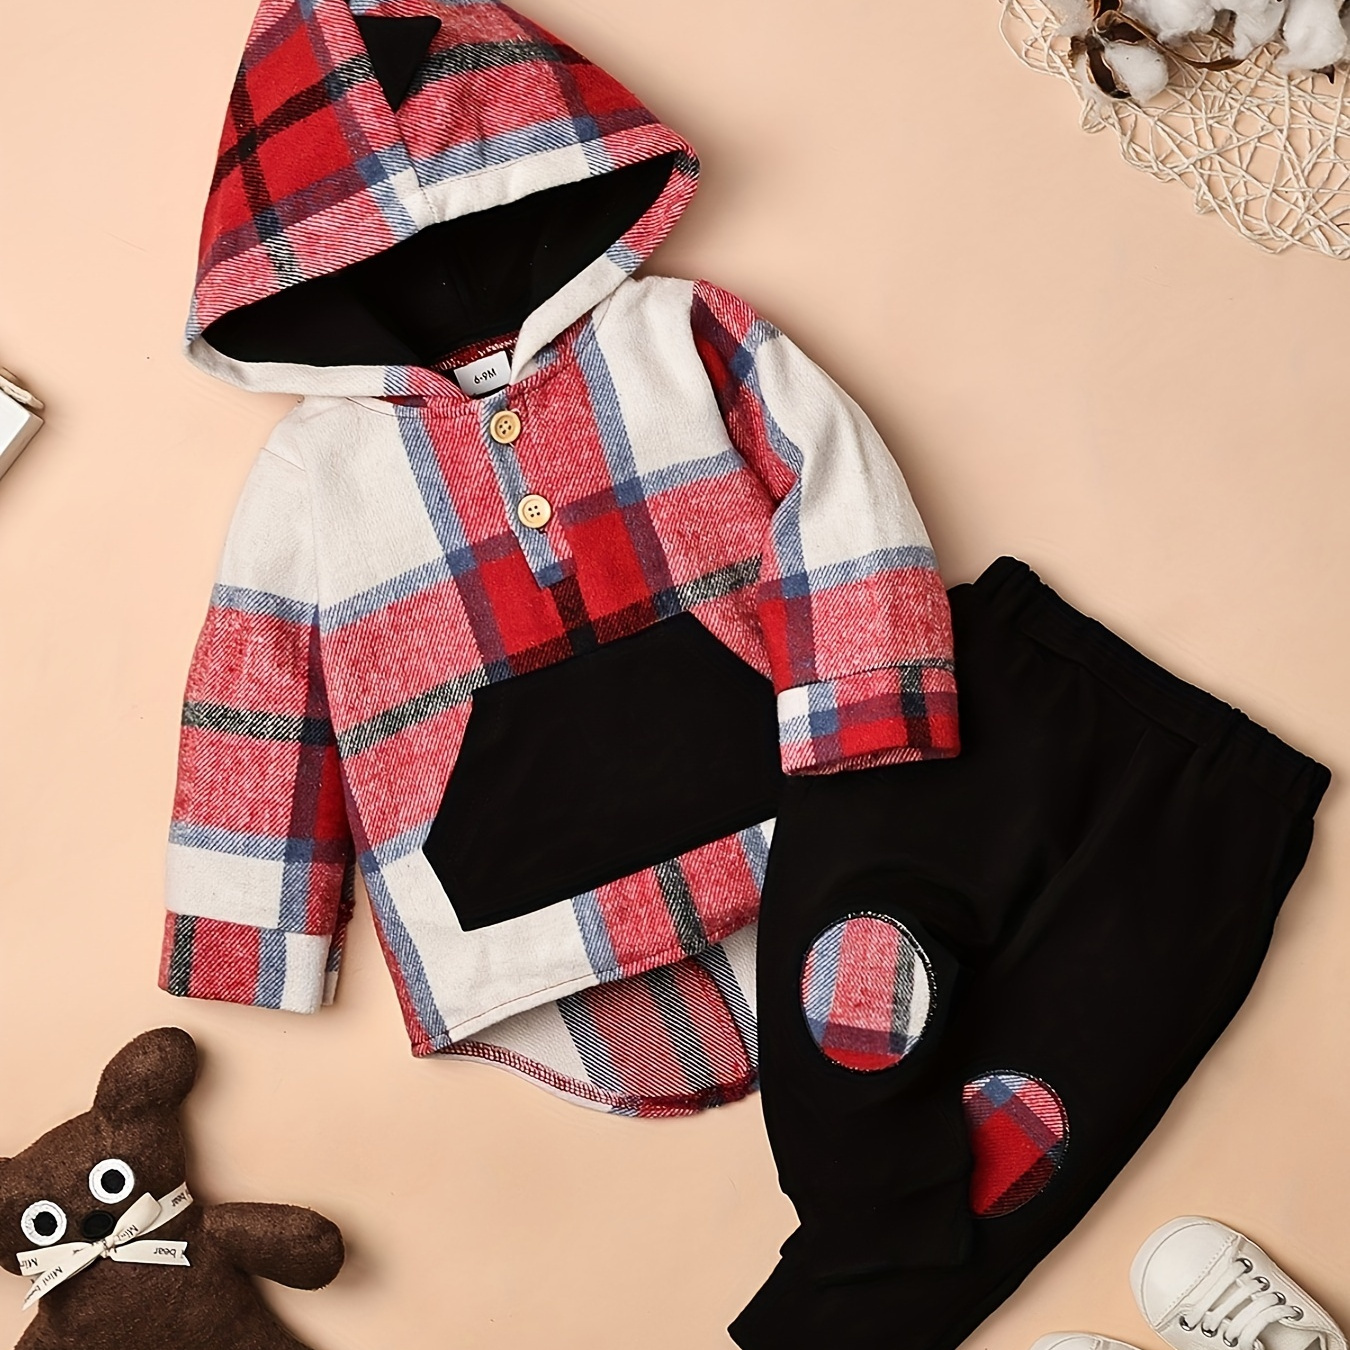 

Toddler Boy Clothes Baby Boys Outfits, Plaid Dinosaur Hoodie Hooded Sweatshirt Fall Winter Outfits Long Sleeve Tops Pocket Pants Set 2pcs 6 Months - 5 Years Old Random Fashion Print